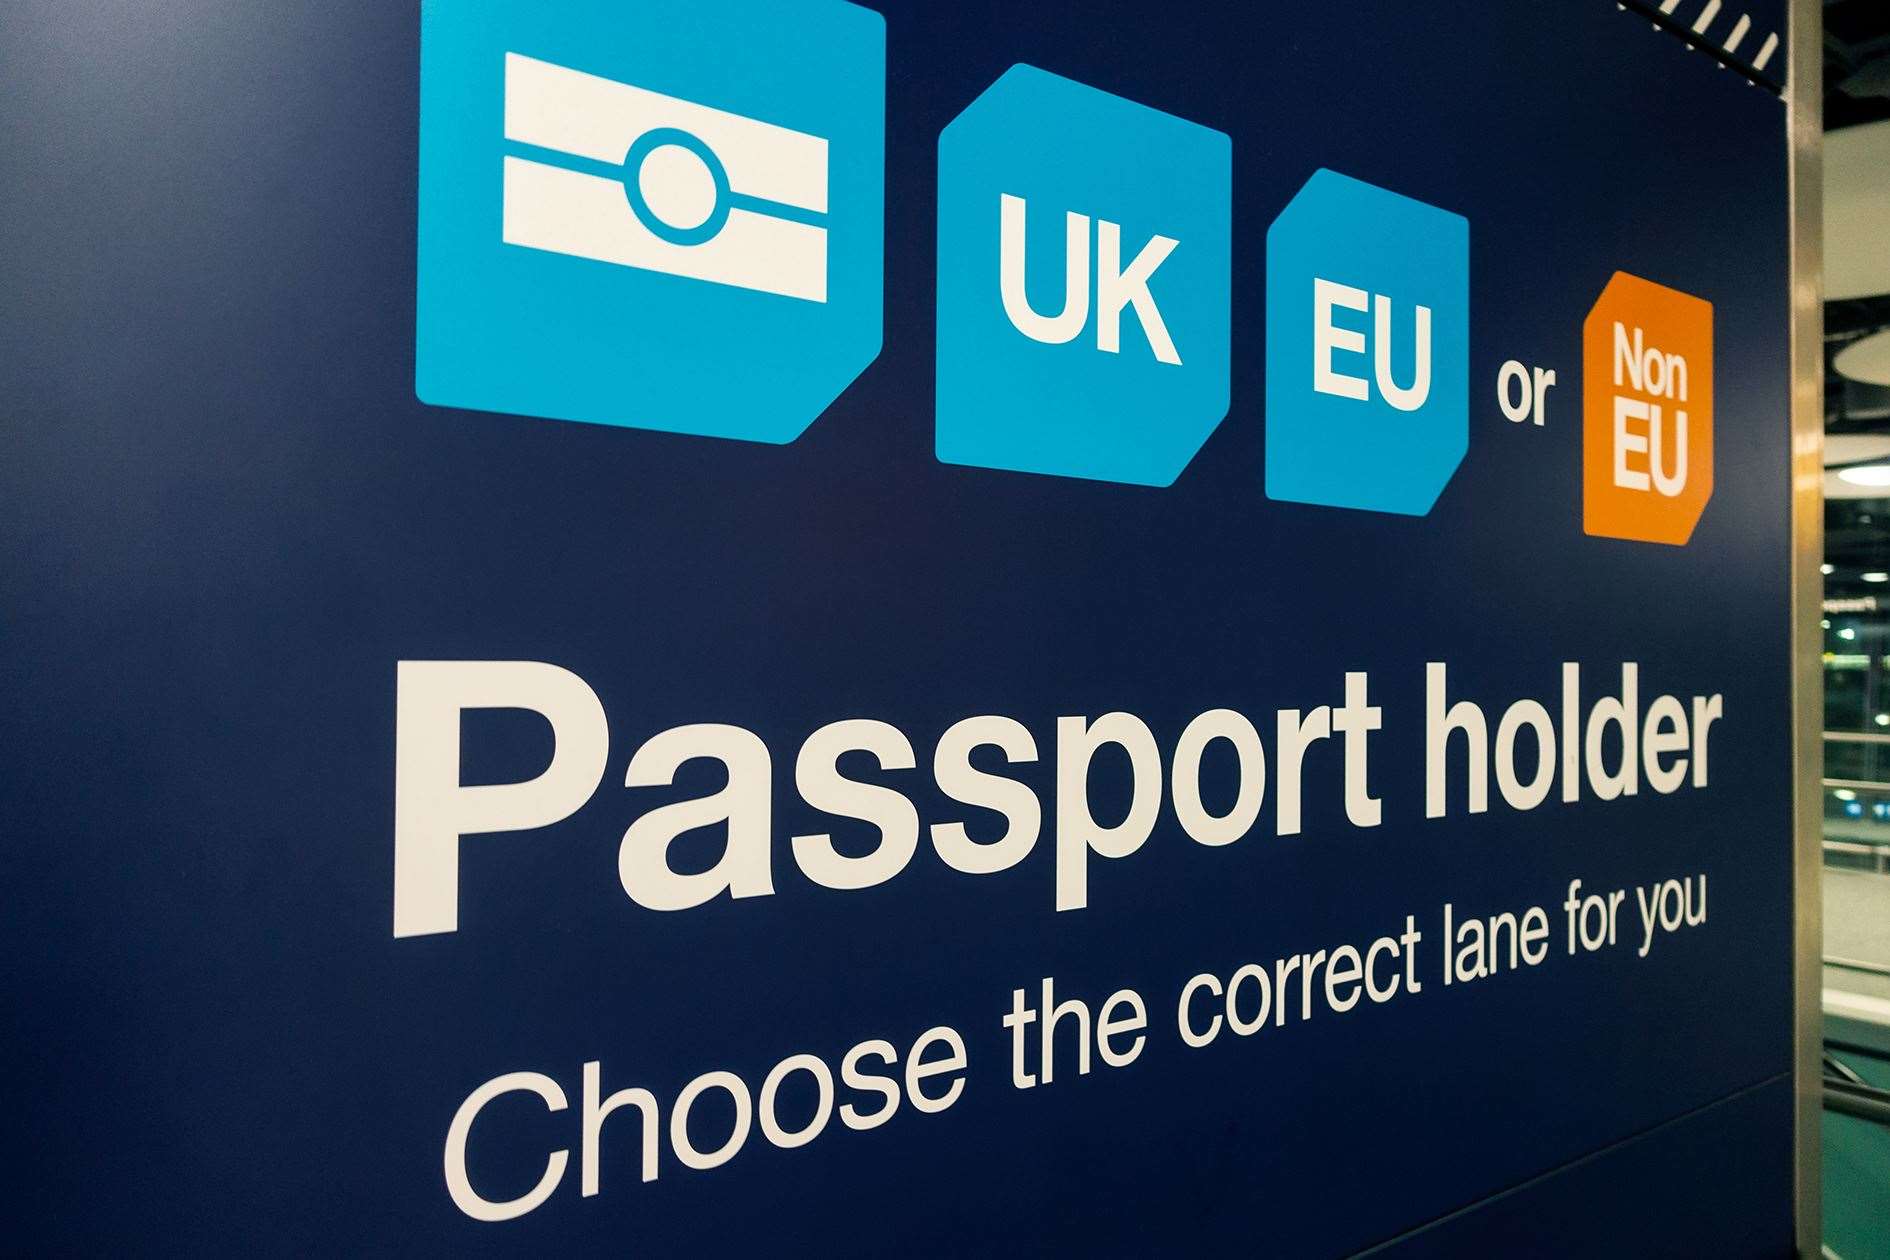 Passport issues are a growing concern for those travelling to EU countries.